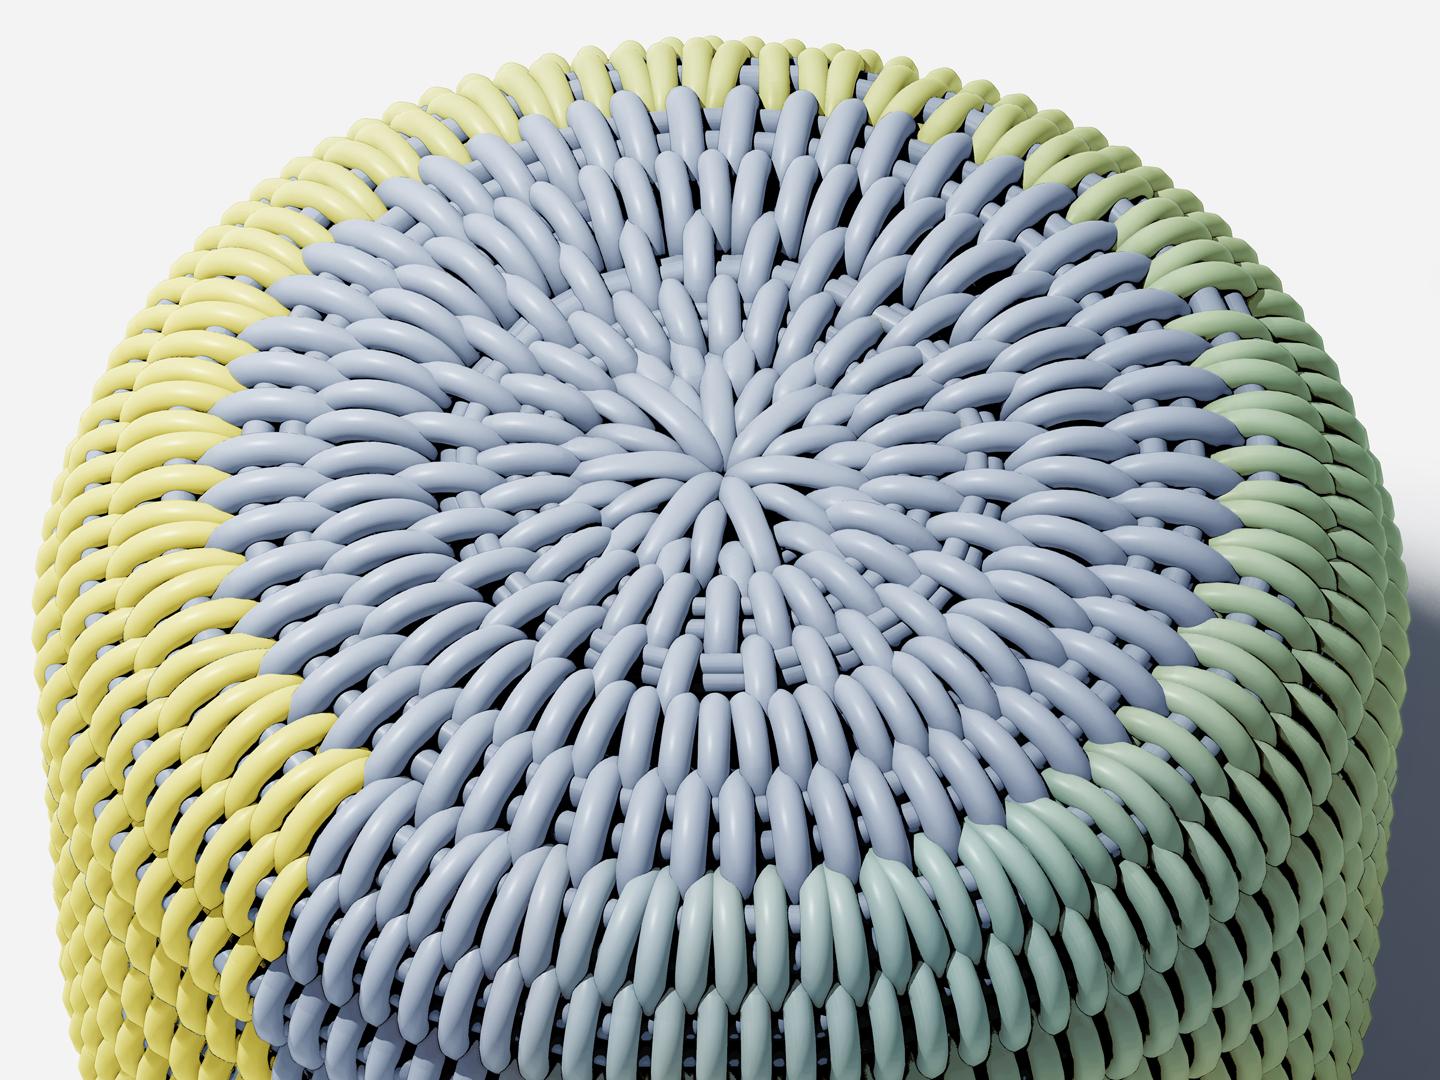 Sunny yellow blends with verdant green in lemon grass, mixing to create a magical spectrum of colors.

Ottomans are fully outdoor/indoor. Our soft, durable silicone textile is stretched over high-performance marine-grade foam, resulting in elegant